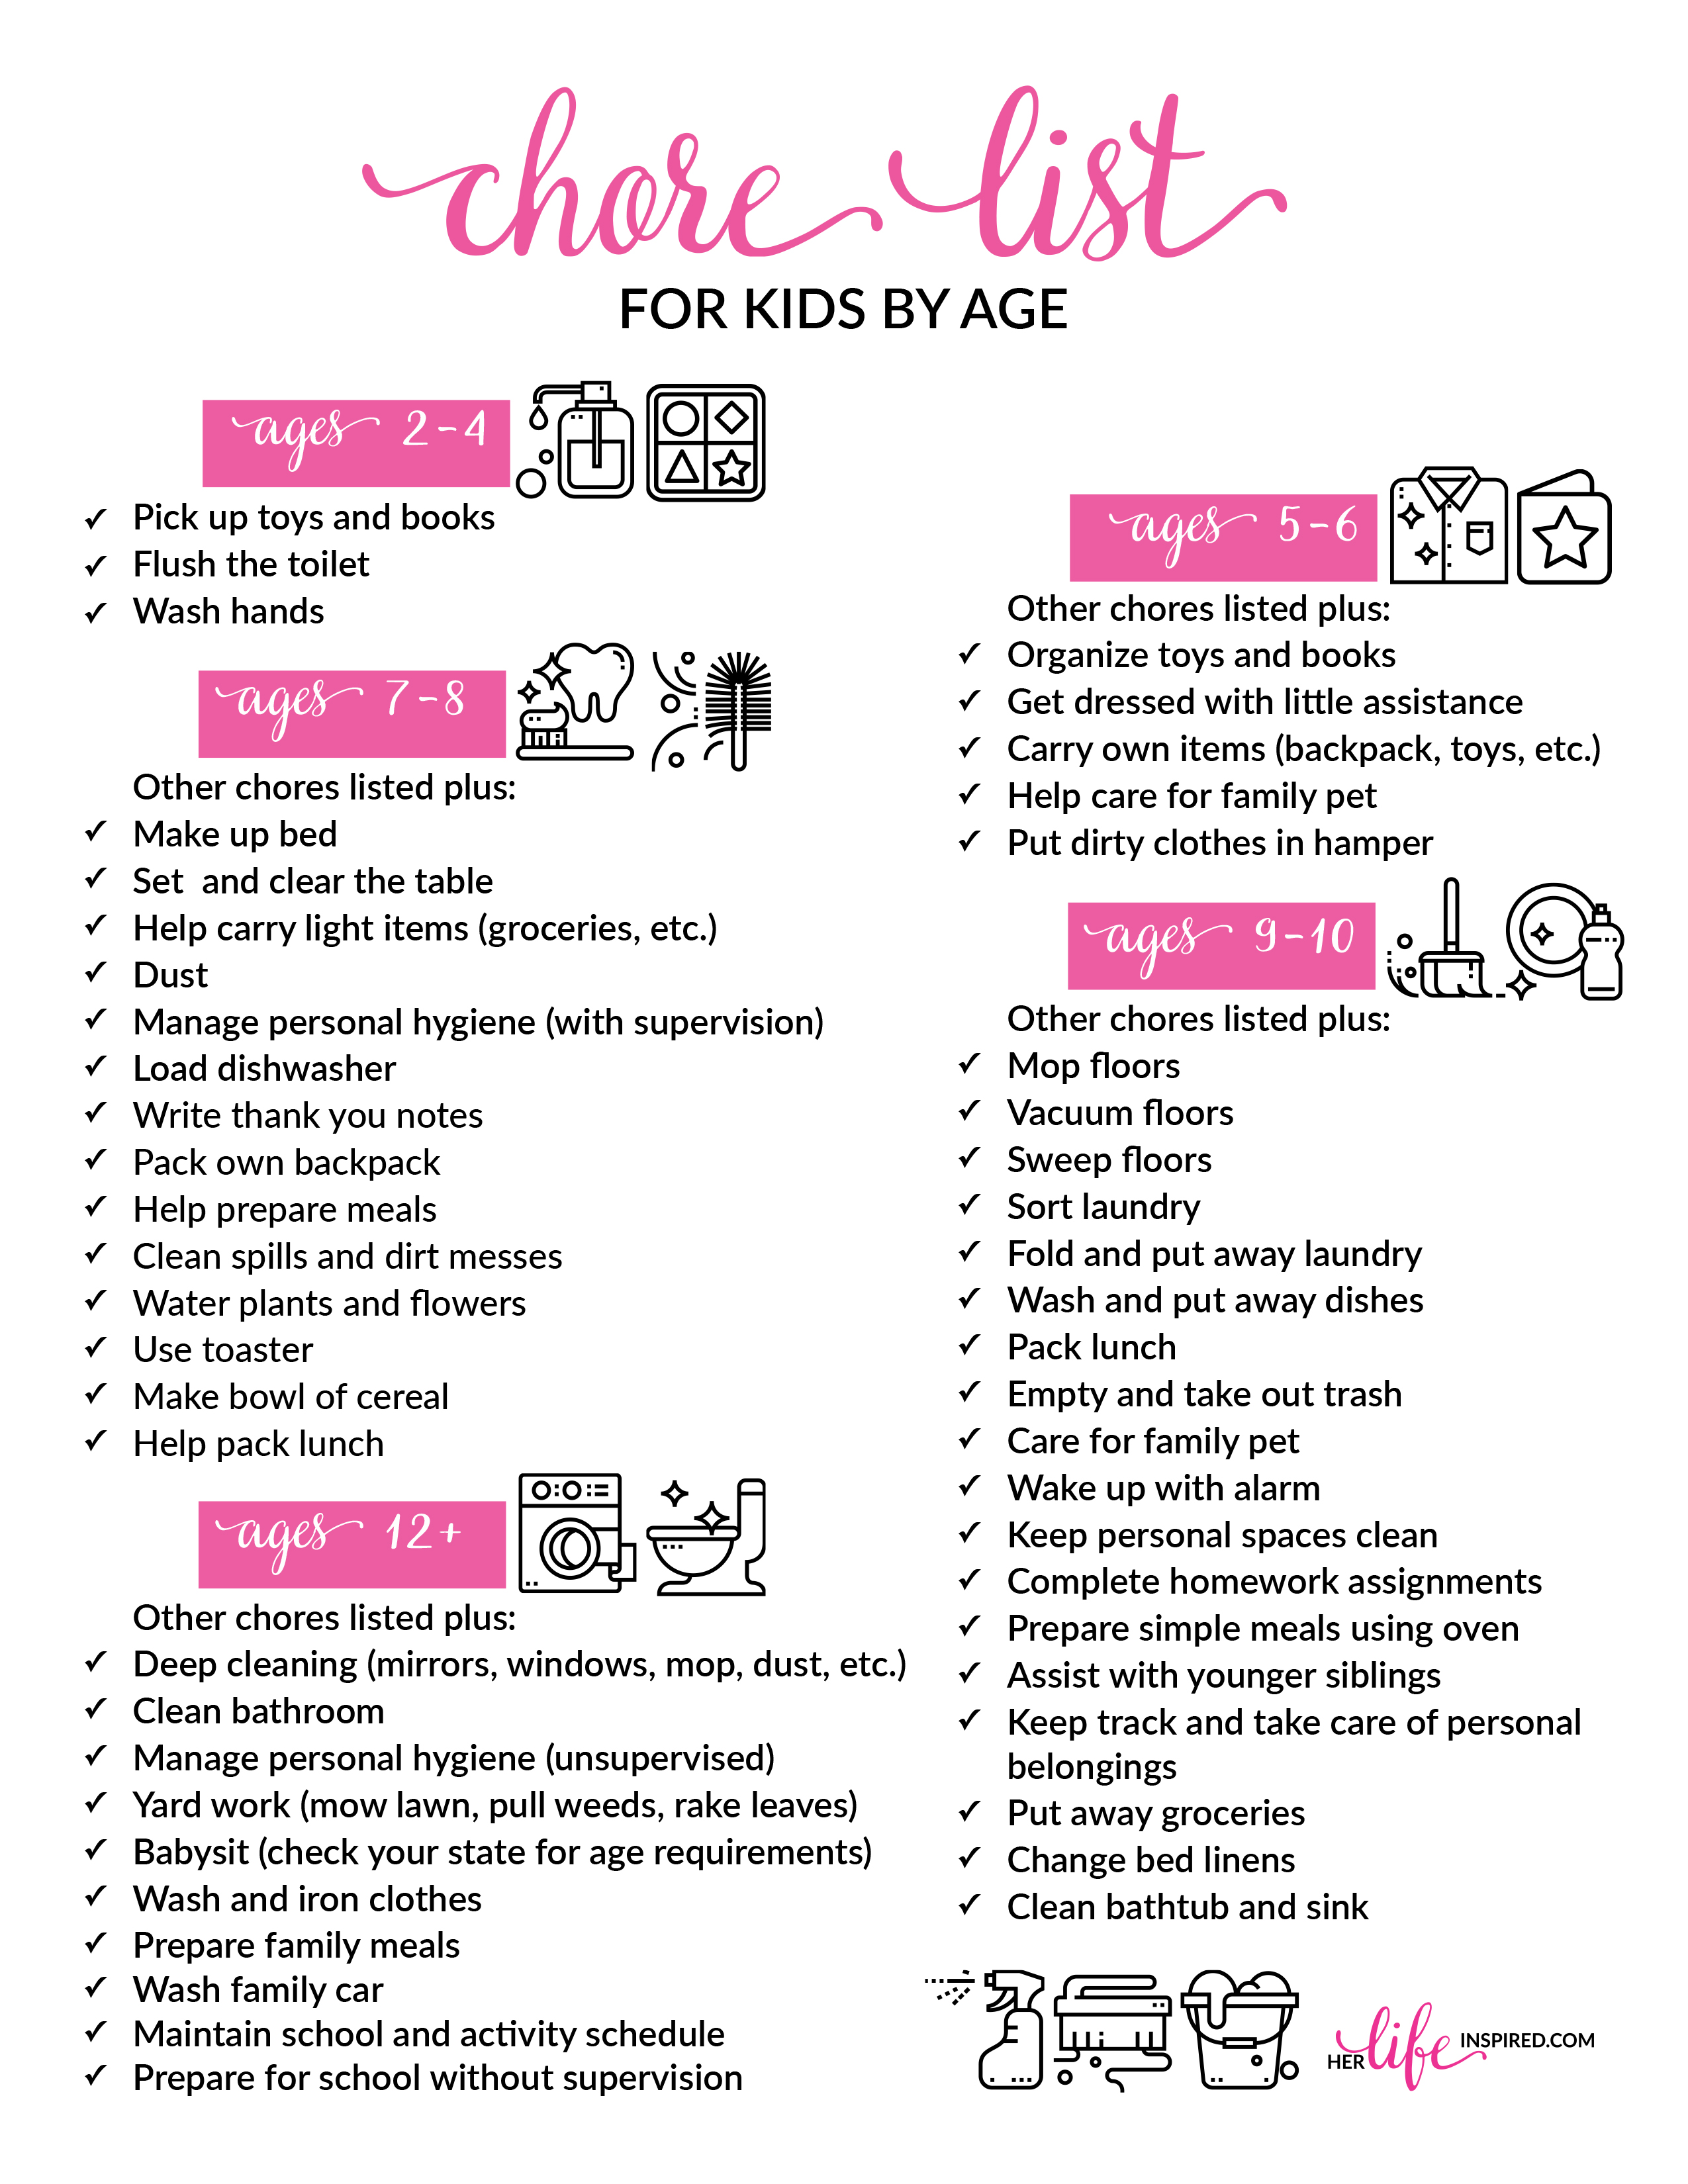 Chore List Ideas For 10 Year Olds